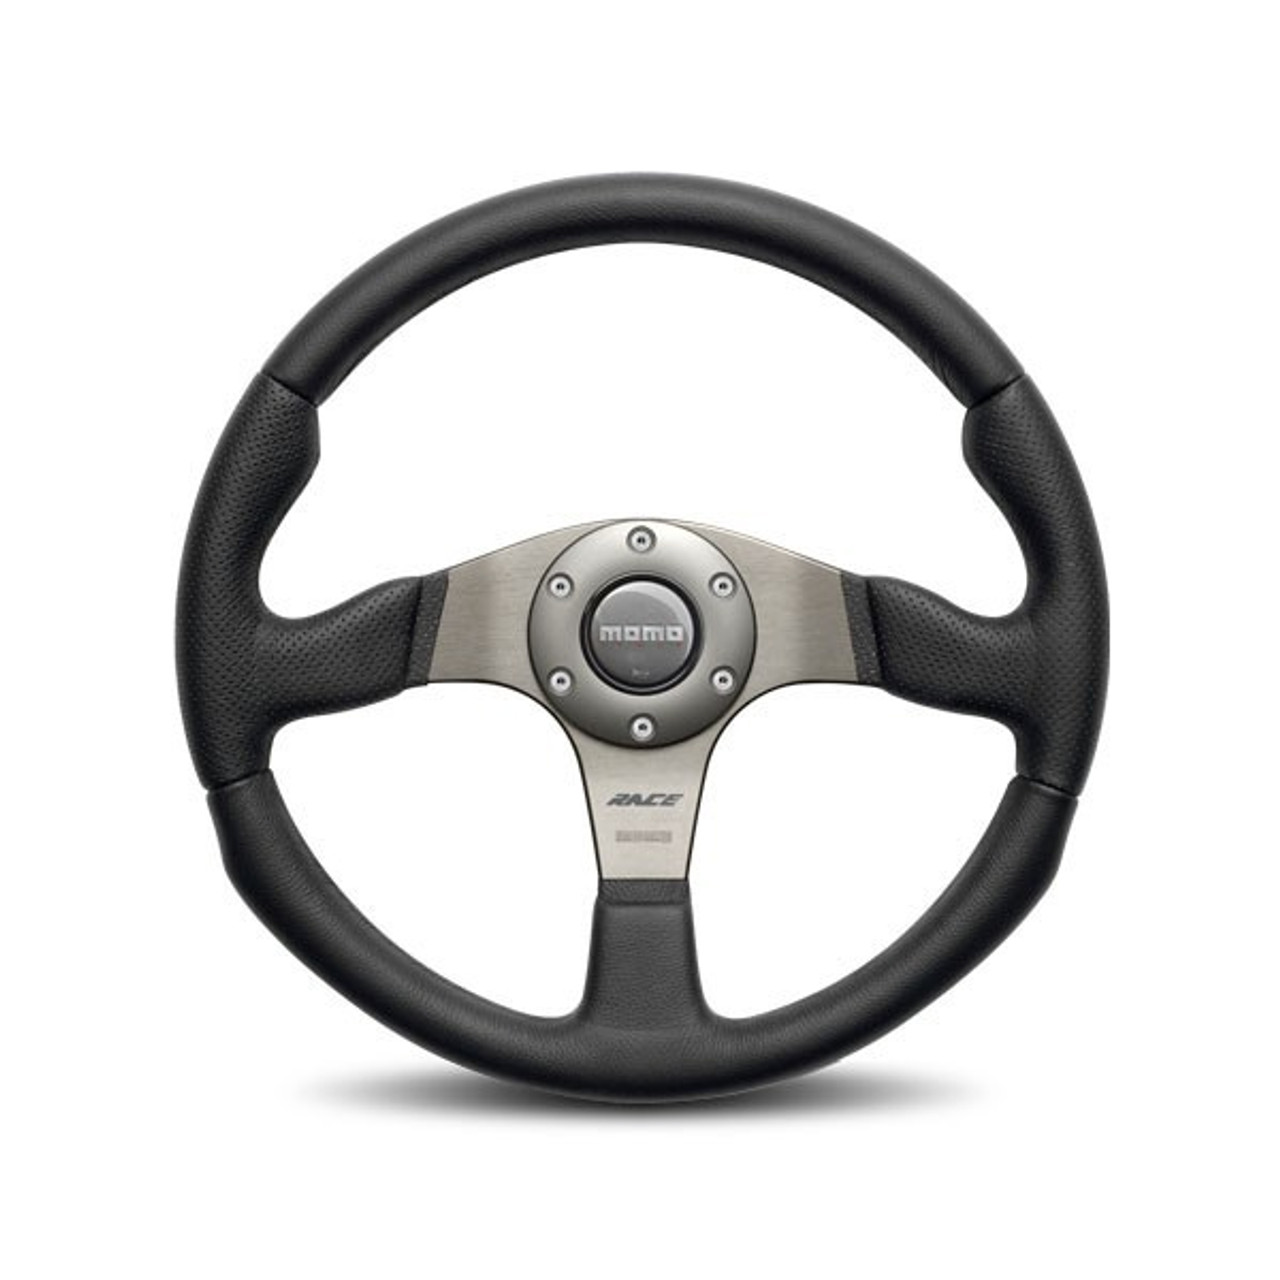 Race 350 Steering Wheel Leather / Airleather